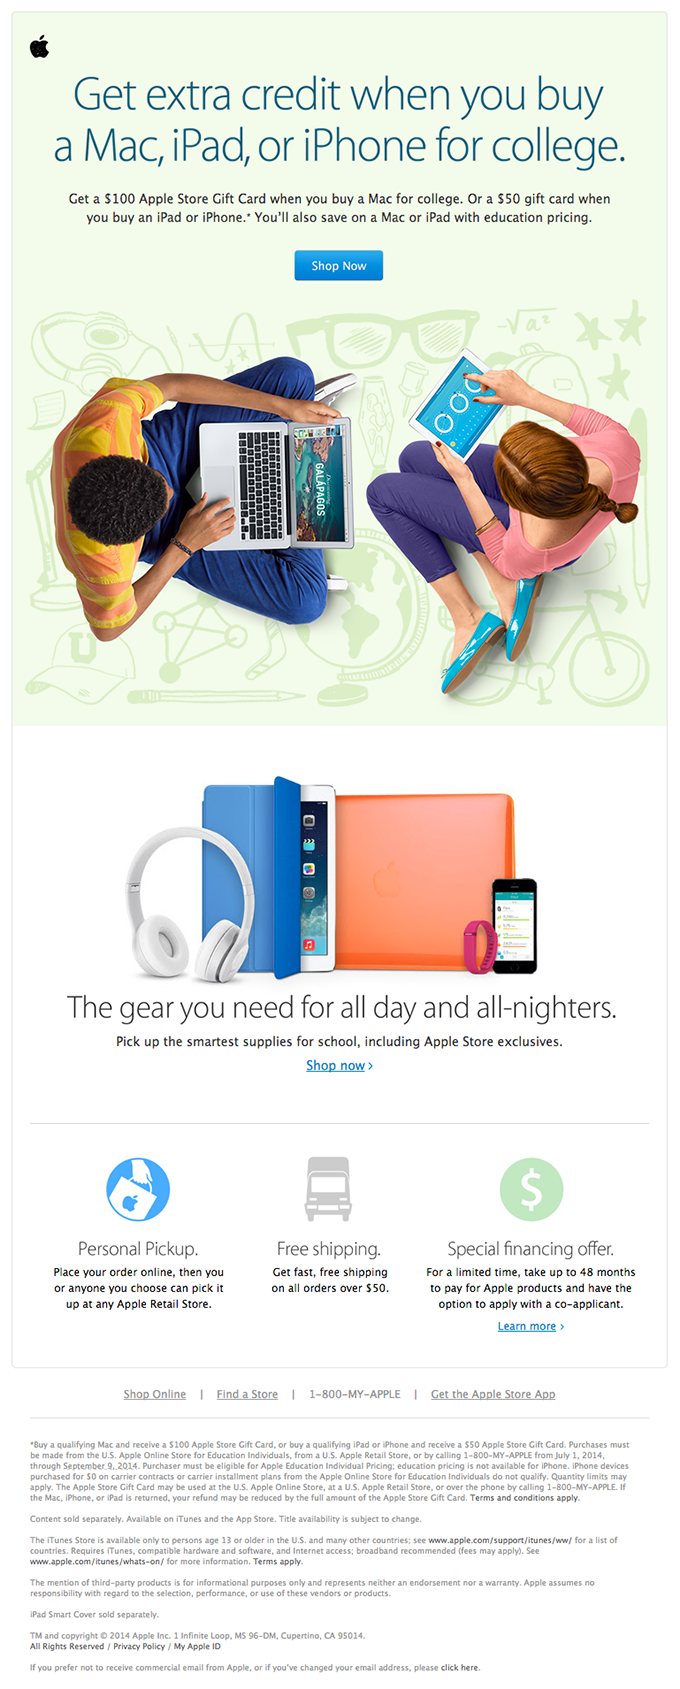 Promotional Student Email Design from Apple